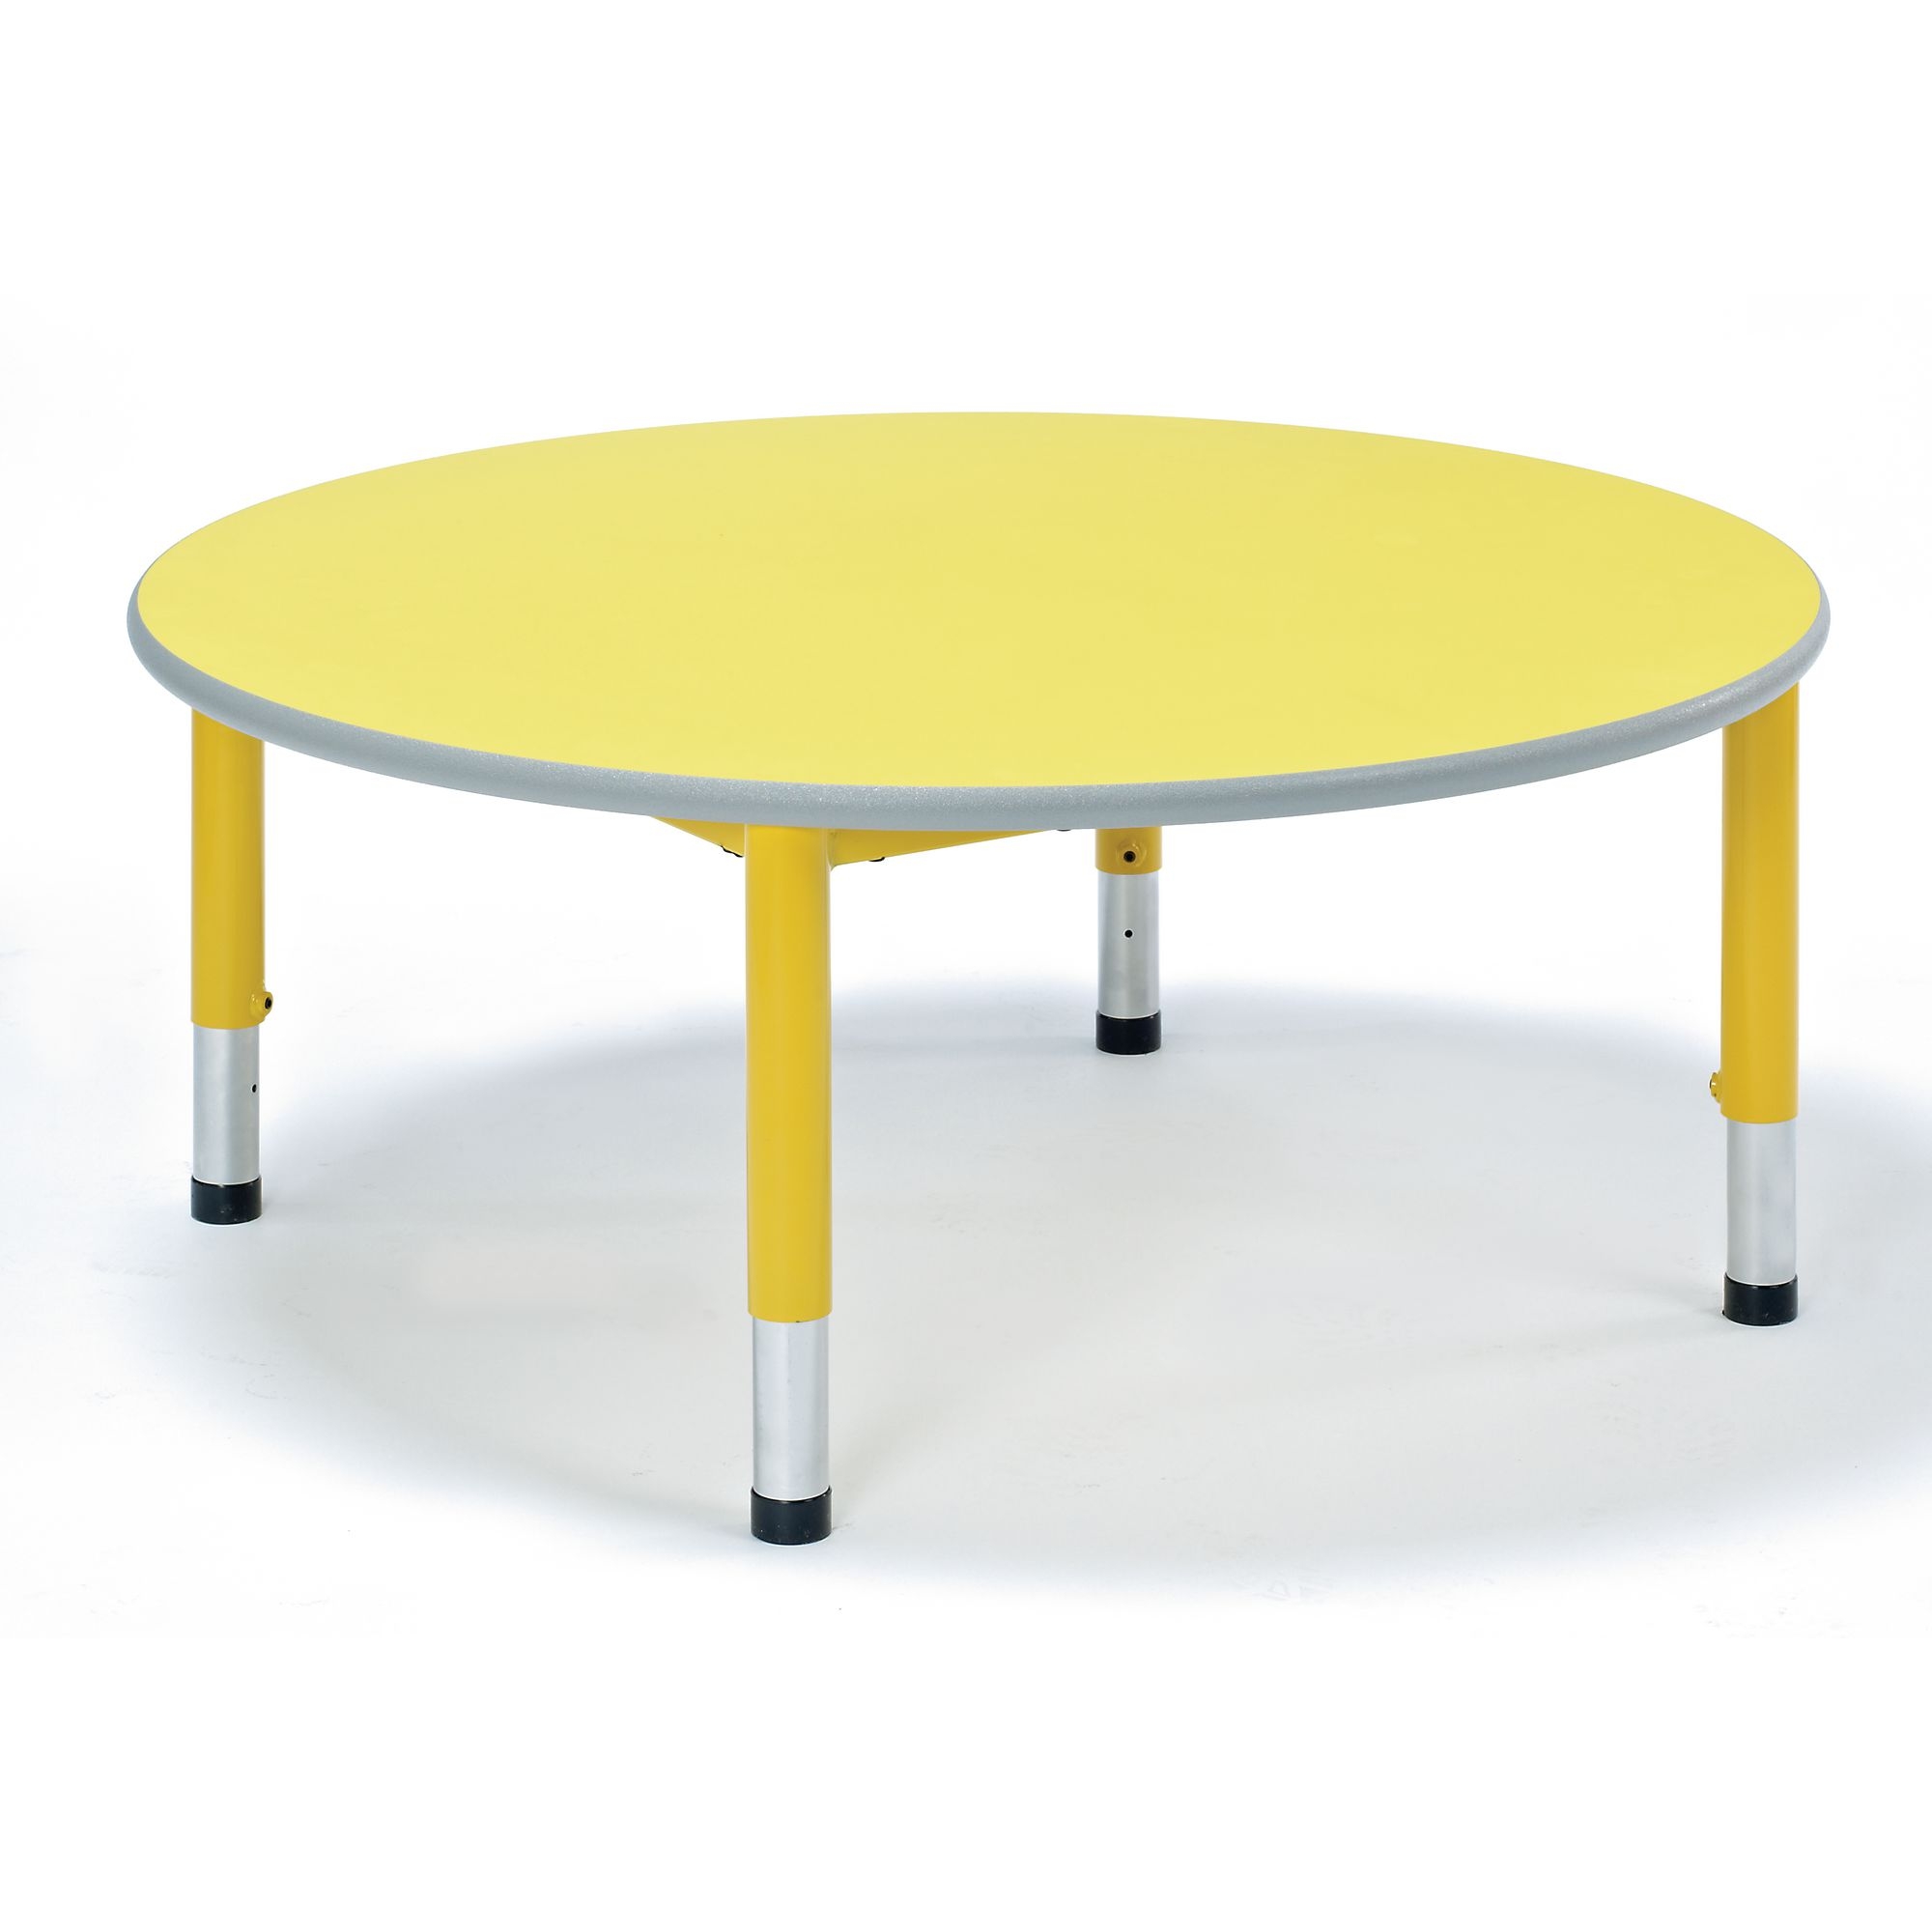 Harlequin Circular Height Adjustable Steel Classroom Table - 1050 x 400 to 640mm - Red